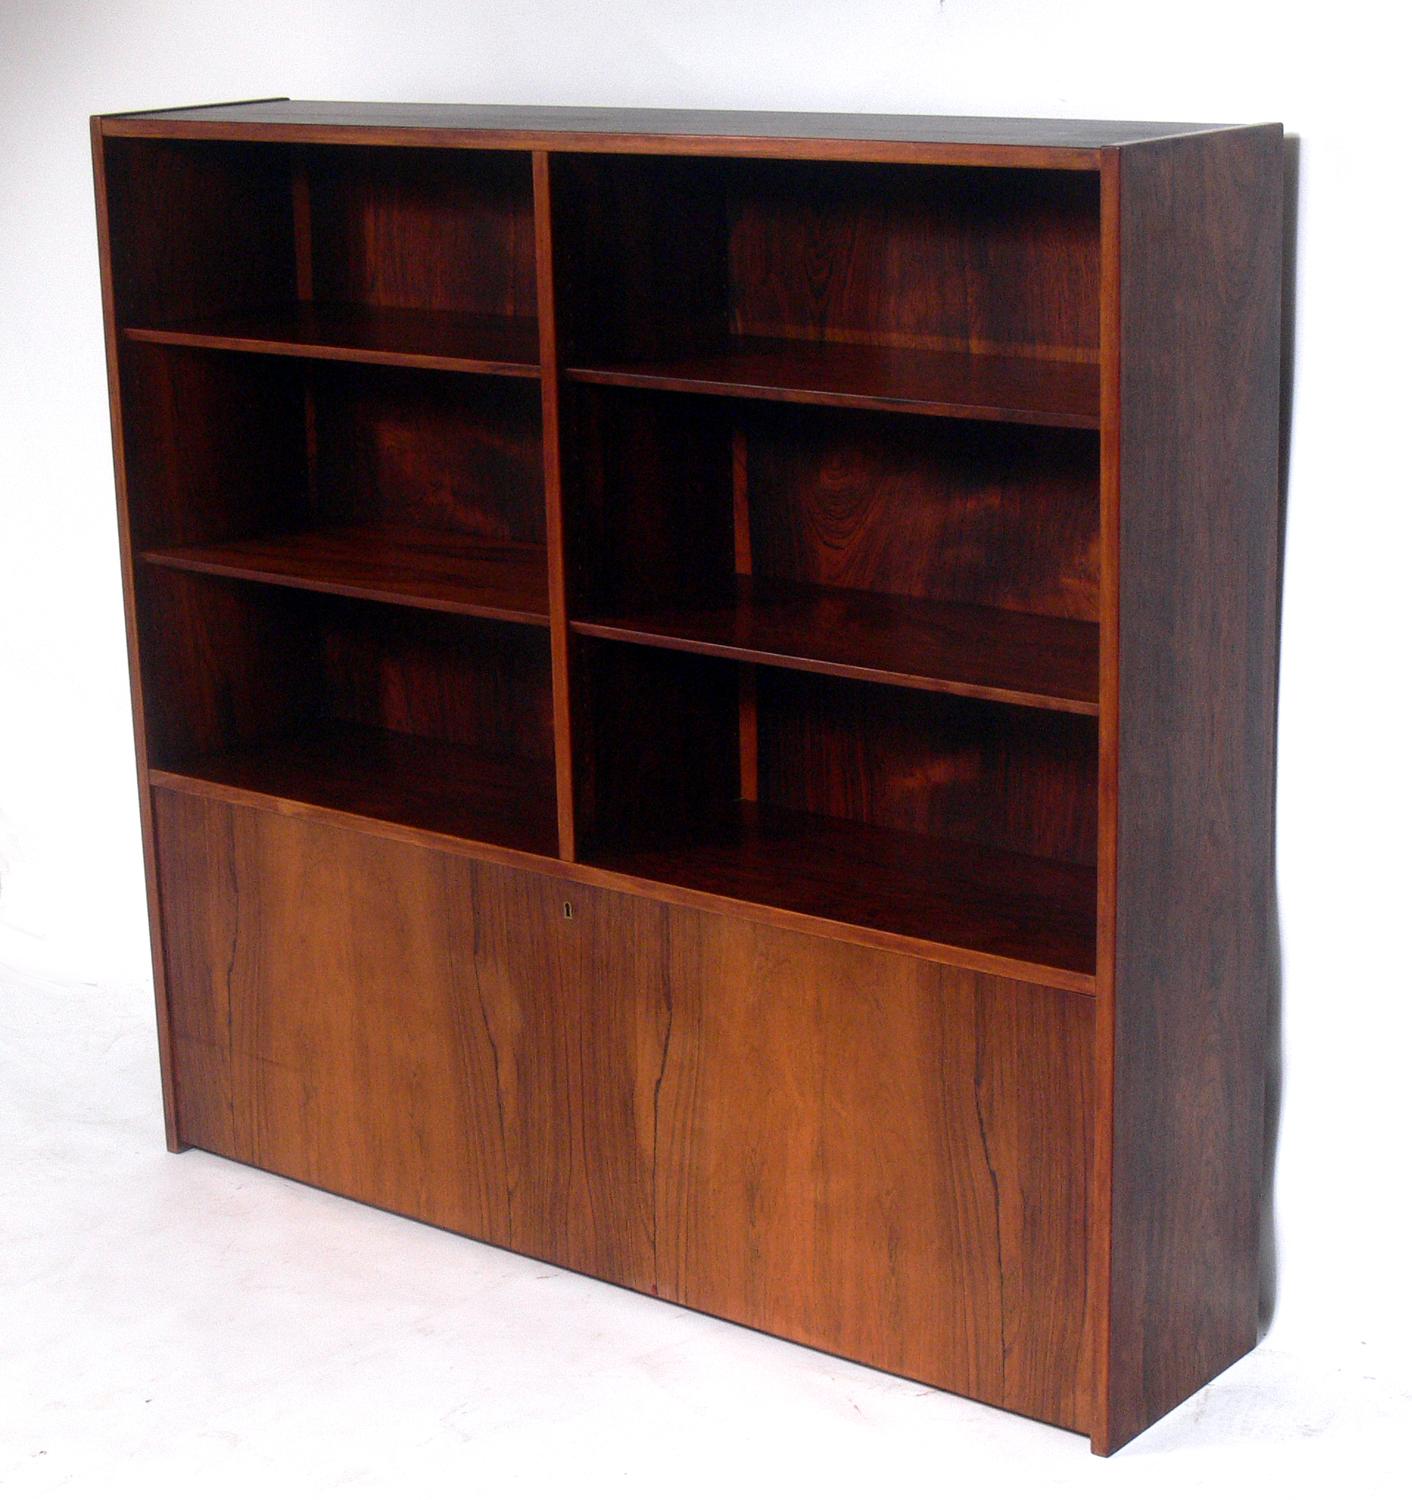 Danish modern rosewood bookshelf, designed by Poul Hundevad and retailed by Asbjorn Mobler, Denmark, circa 1960s. Beautiful graining to the rosewood. It offers a voluminous amount of storage with four adjustable shelves at the top and the bottom